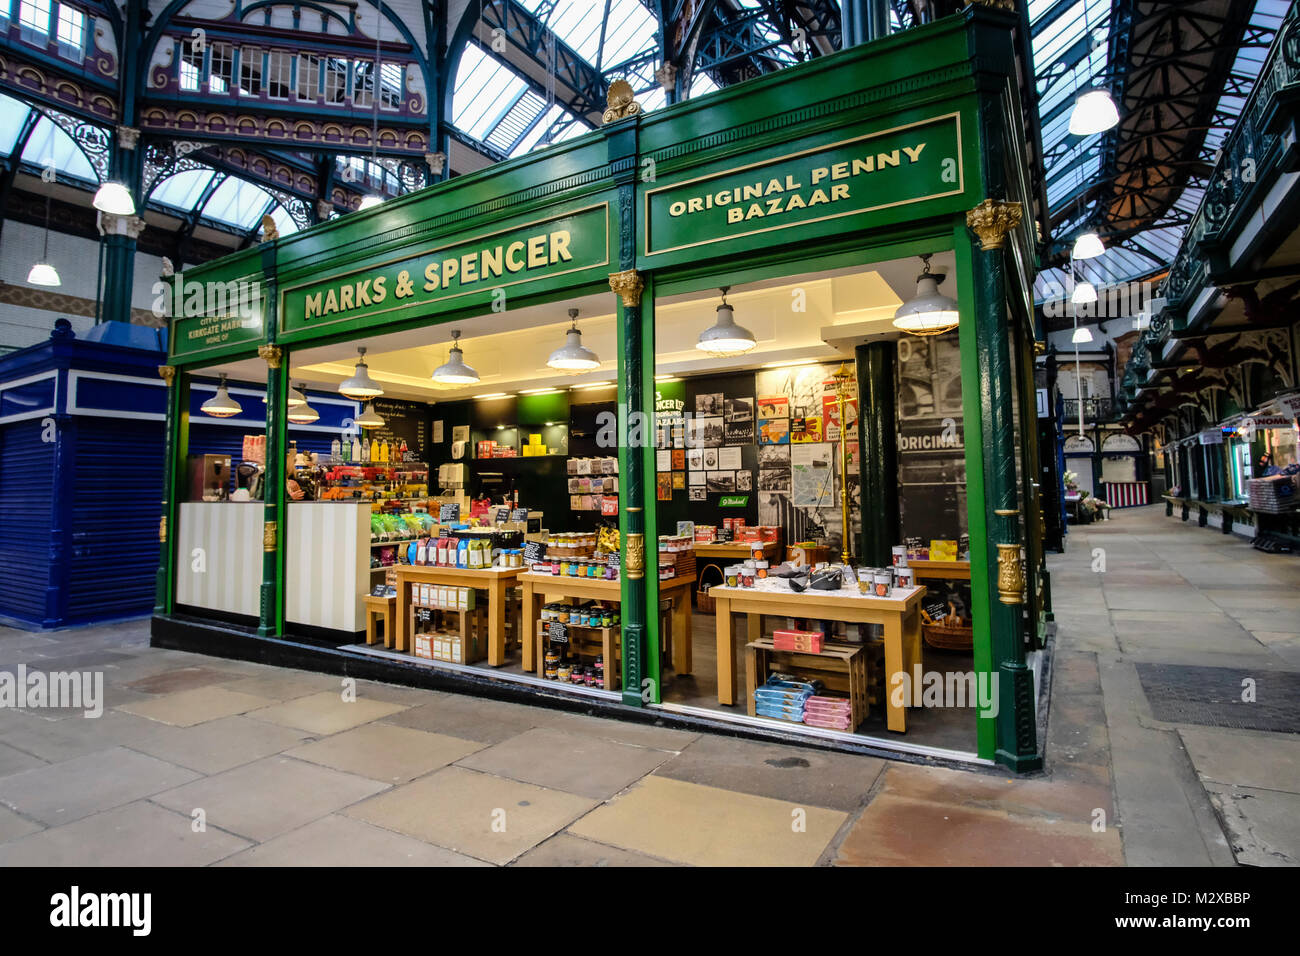 The Penny Bazaar: Marks & Spencer goes back to its roots by opening shop in Leeds Market where founder first set up stall 130 years ago. Stock Photo